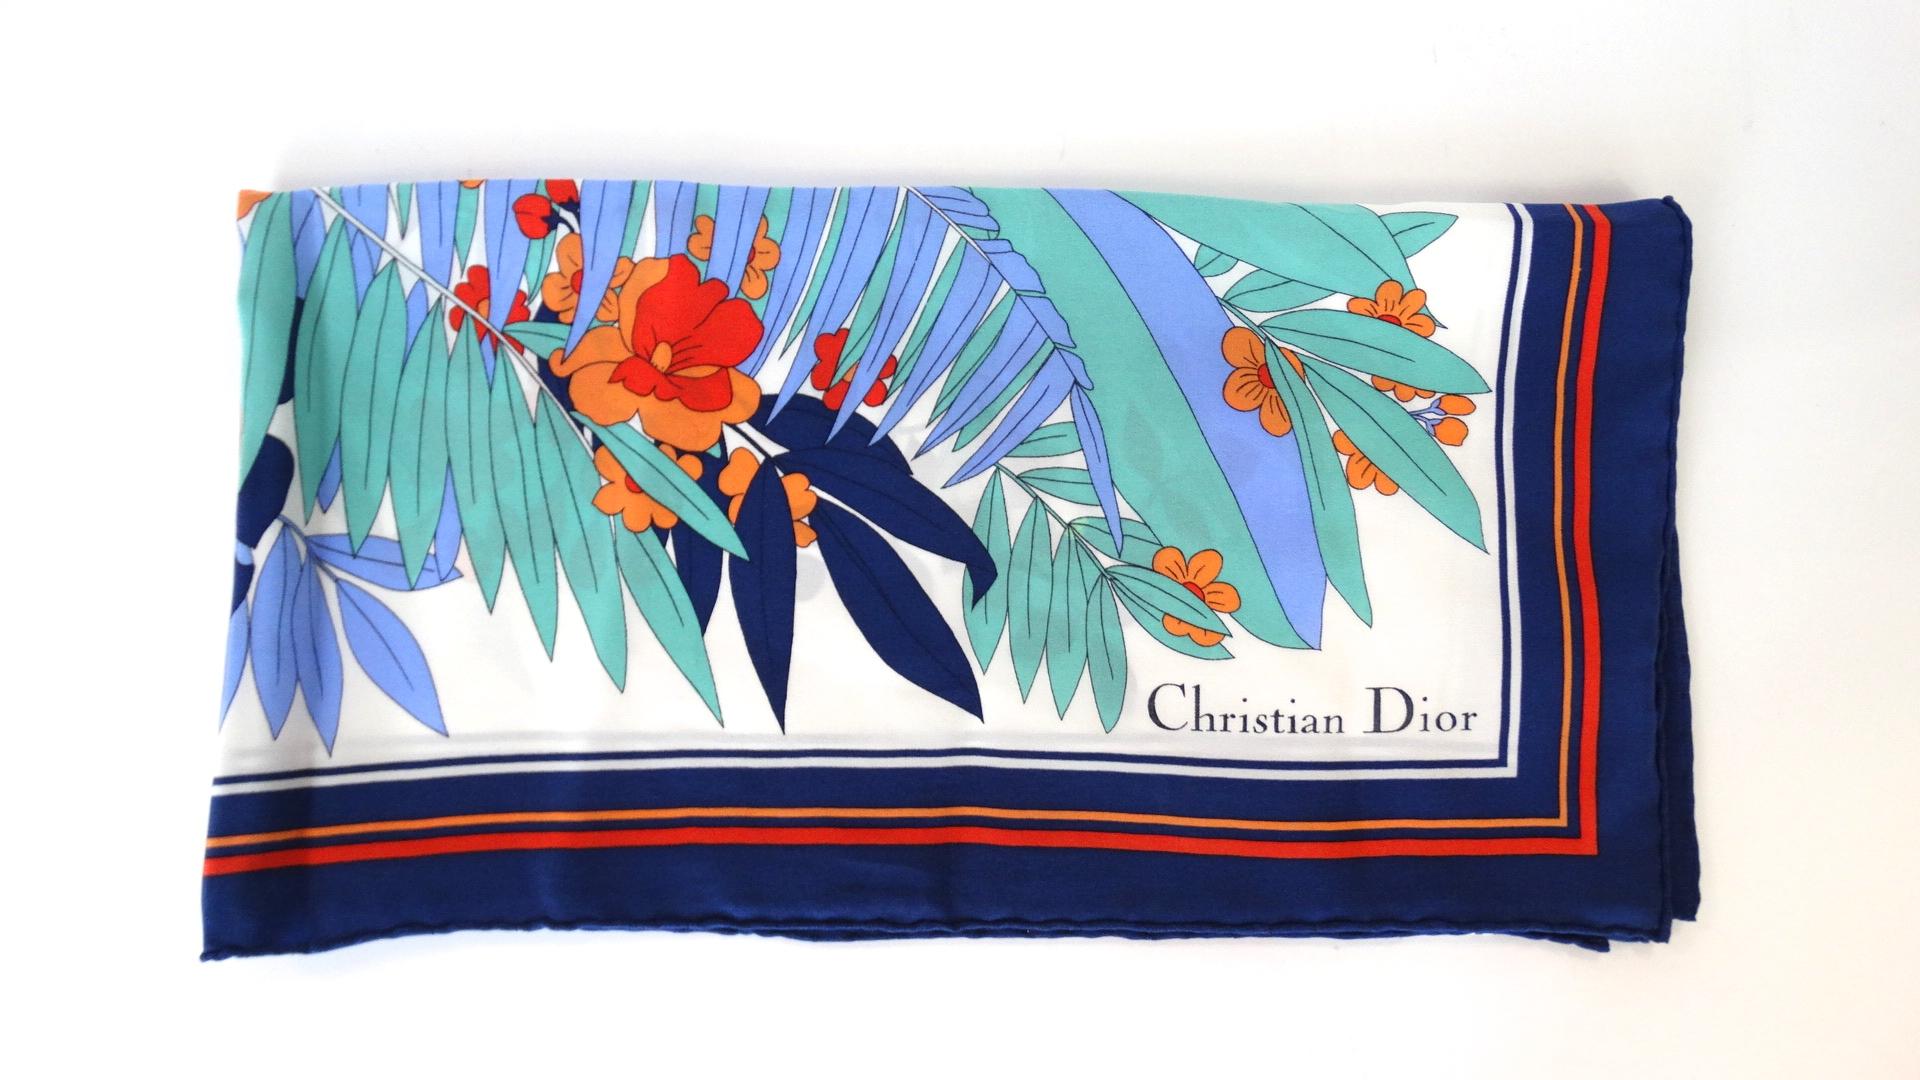 We love a good silk scarf for summer- and you will too with our adorable tropical printed silk scarf from none other than Christian Dior! Quality silk fabric printed with colorful palms and hibiscus flowers in shades of teal, blue, orange and red.